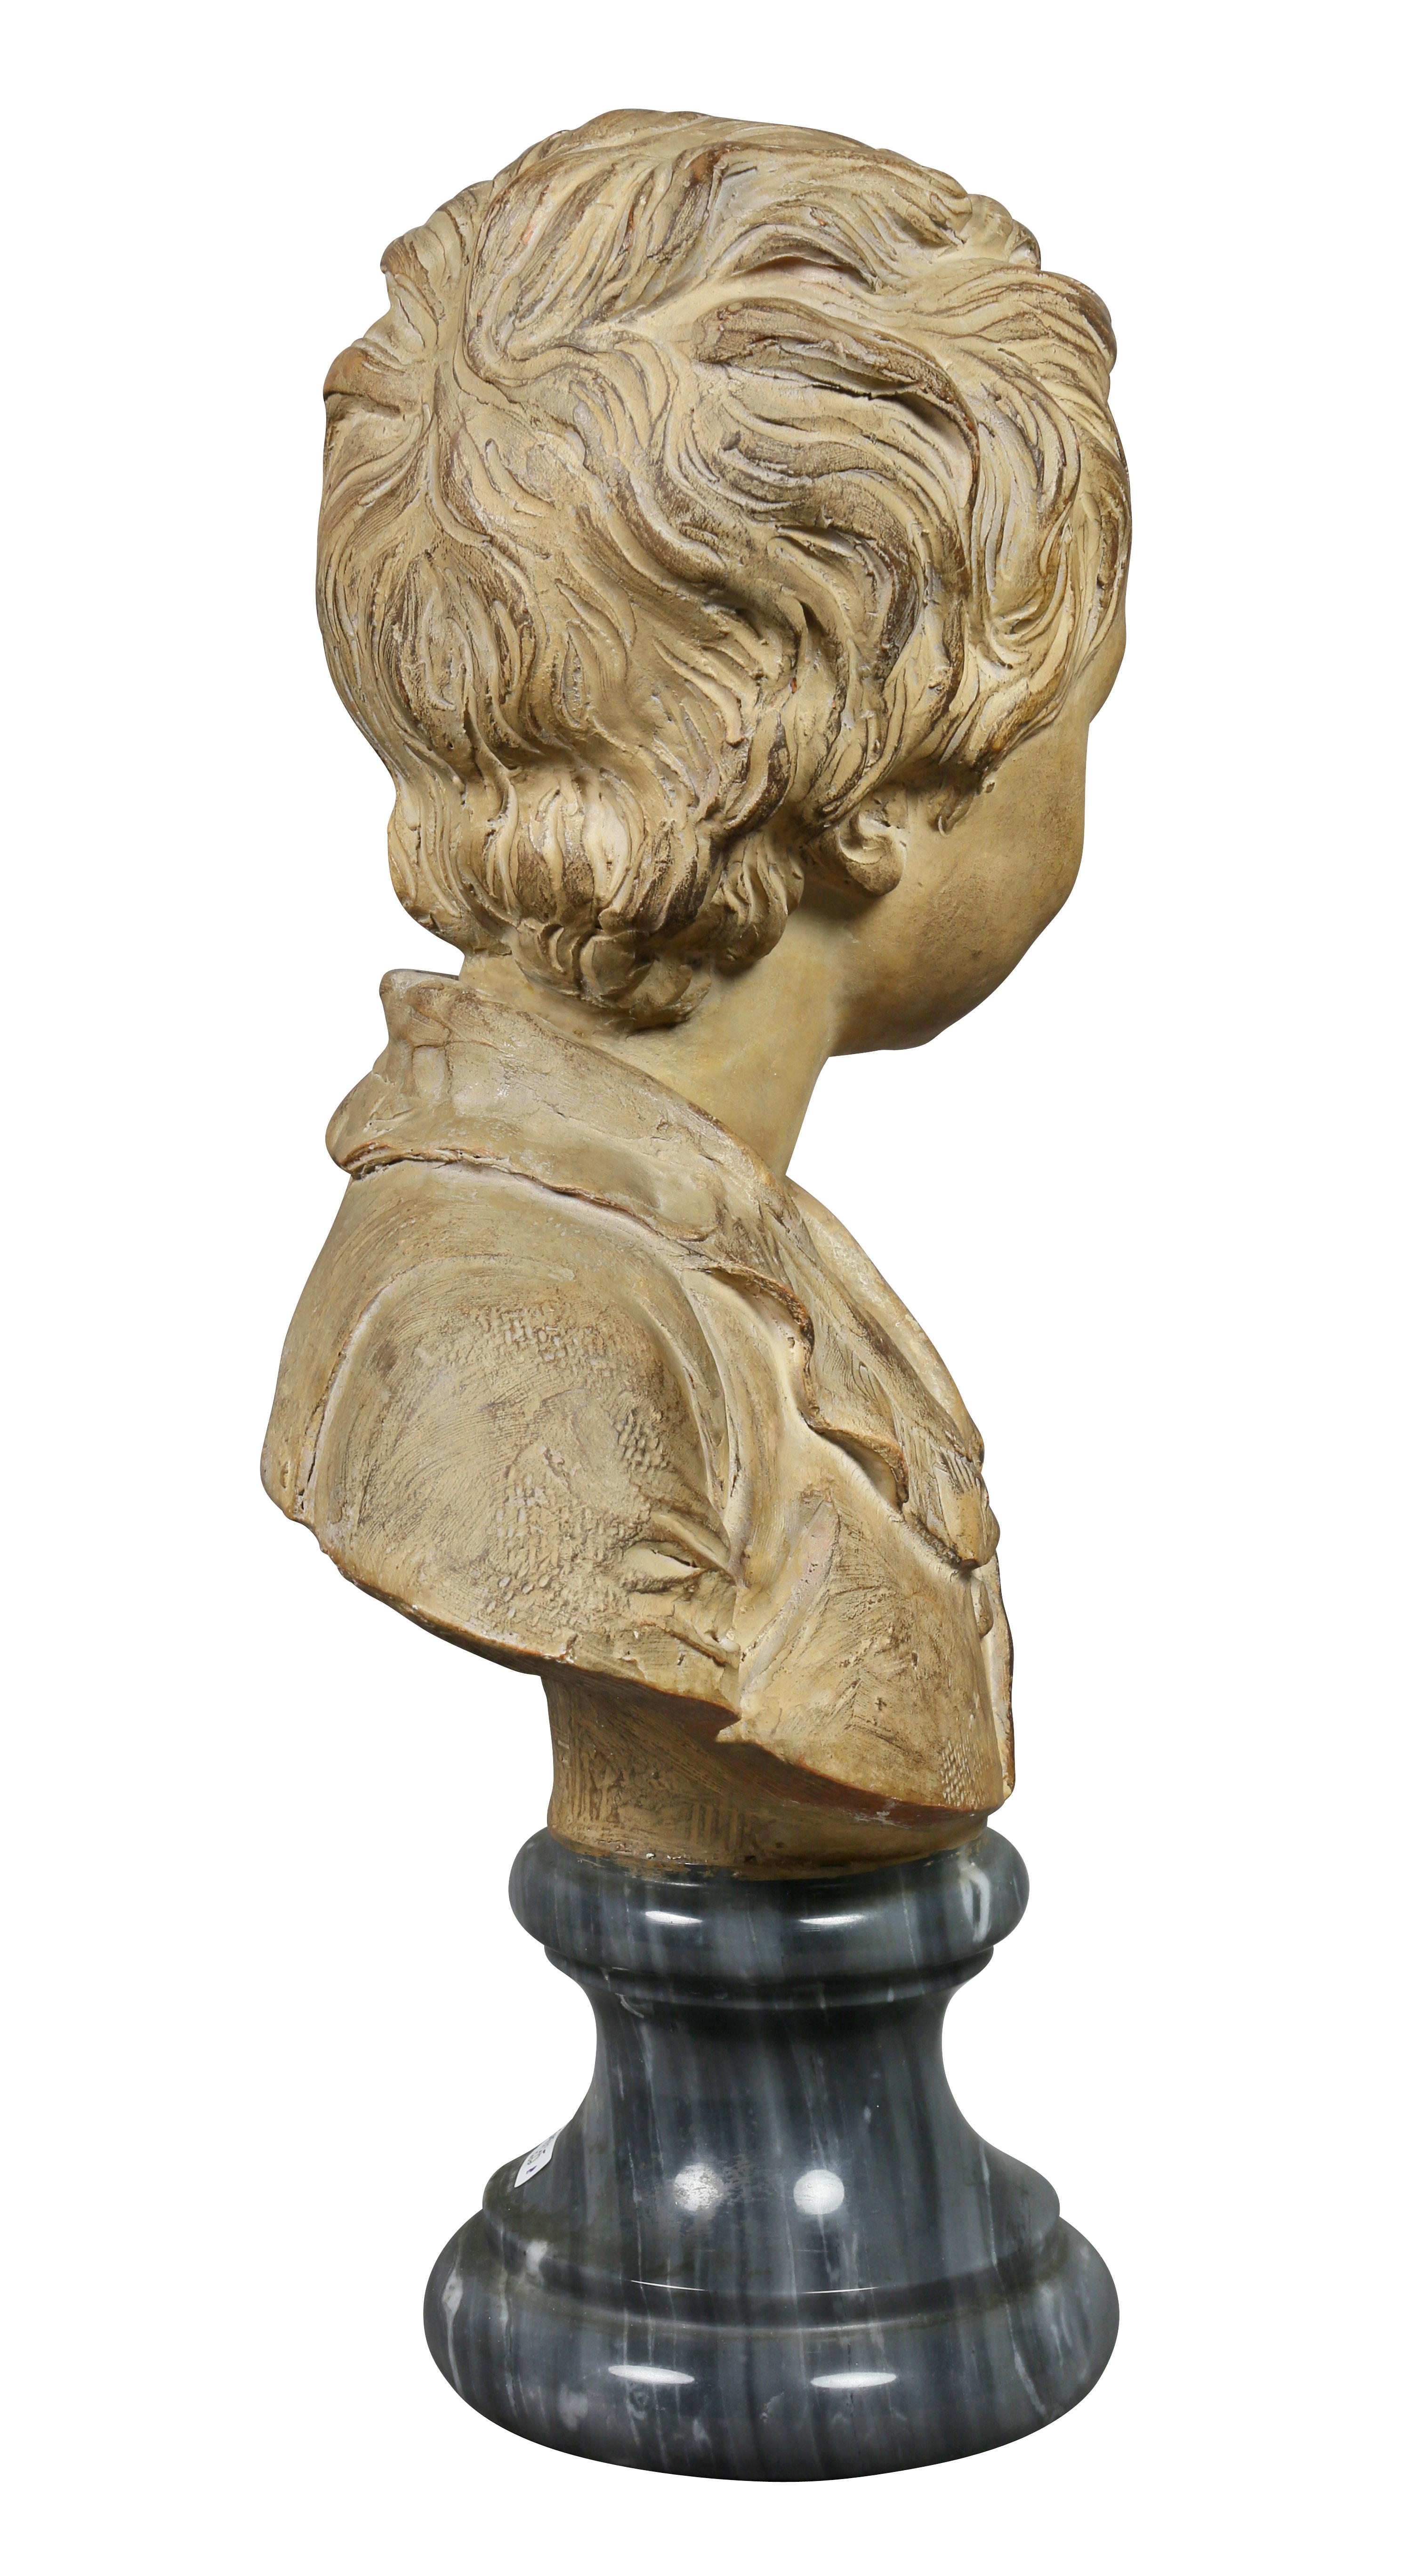 18th Century Terracotta Bust of a Young Boy by Houdon